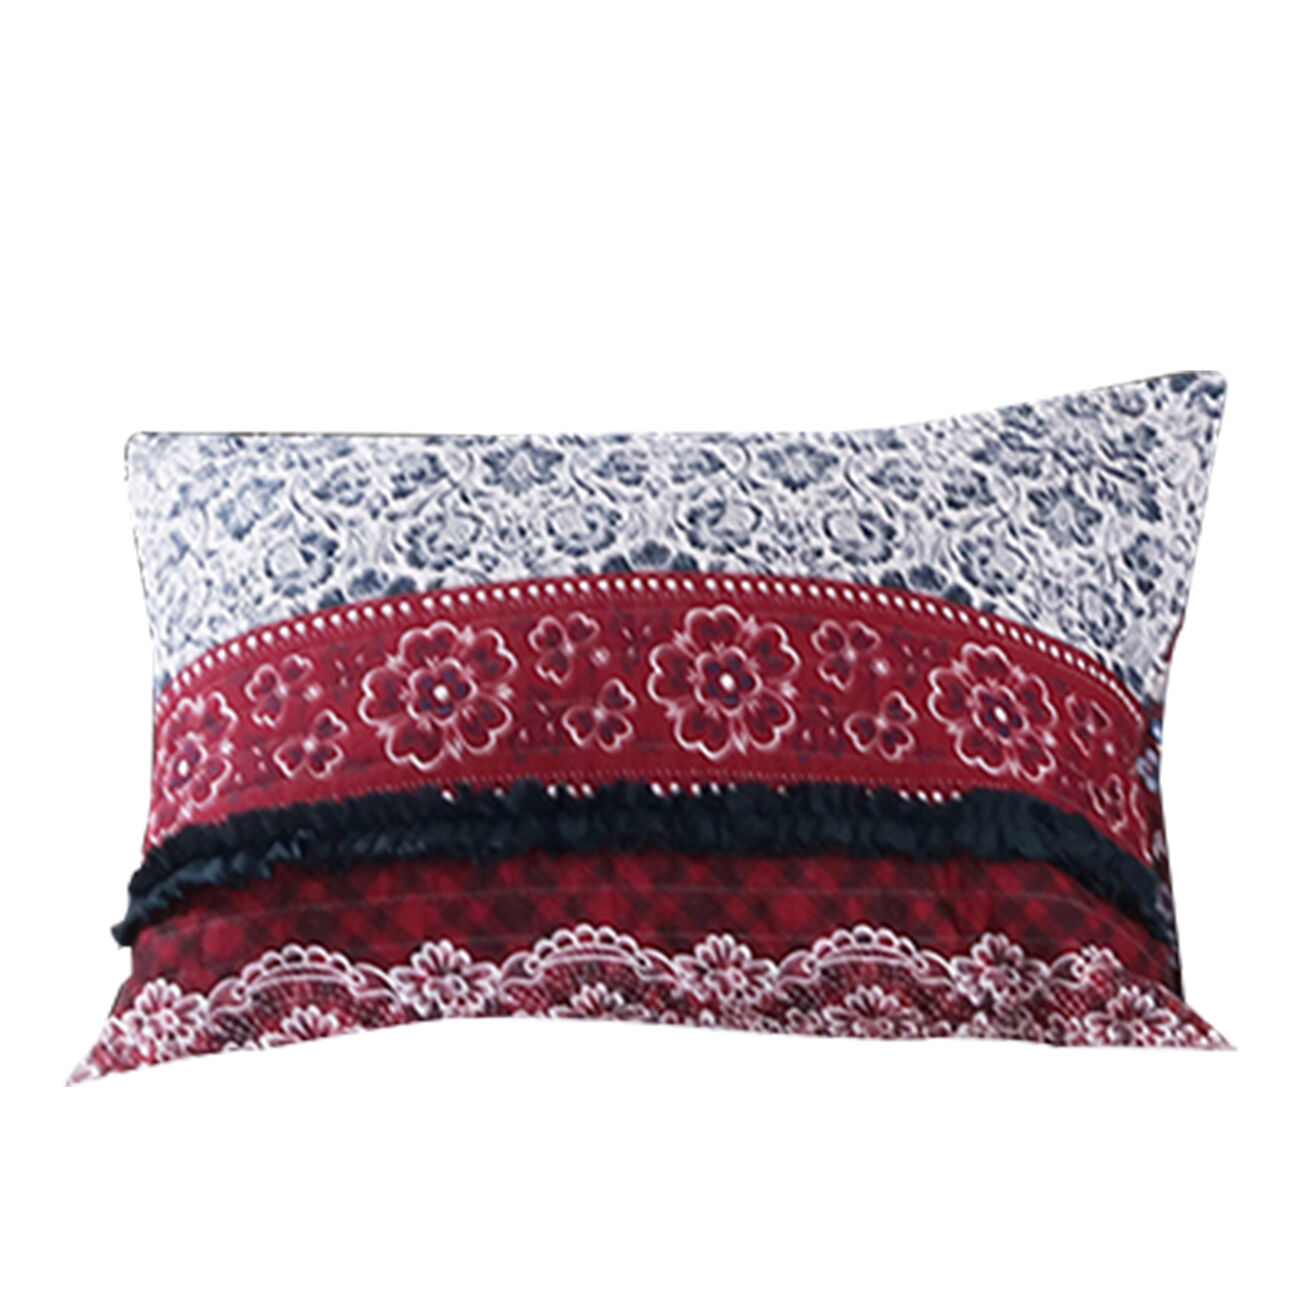 26 x 20 Fabric Pillow Sham with Lace and Ruffled Stitching, Blue and Red - BM223374